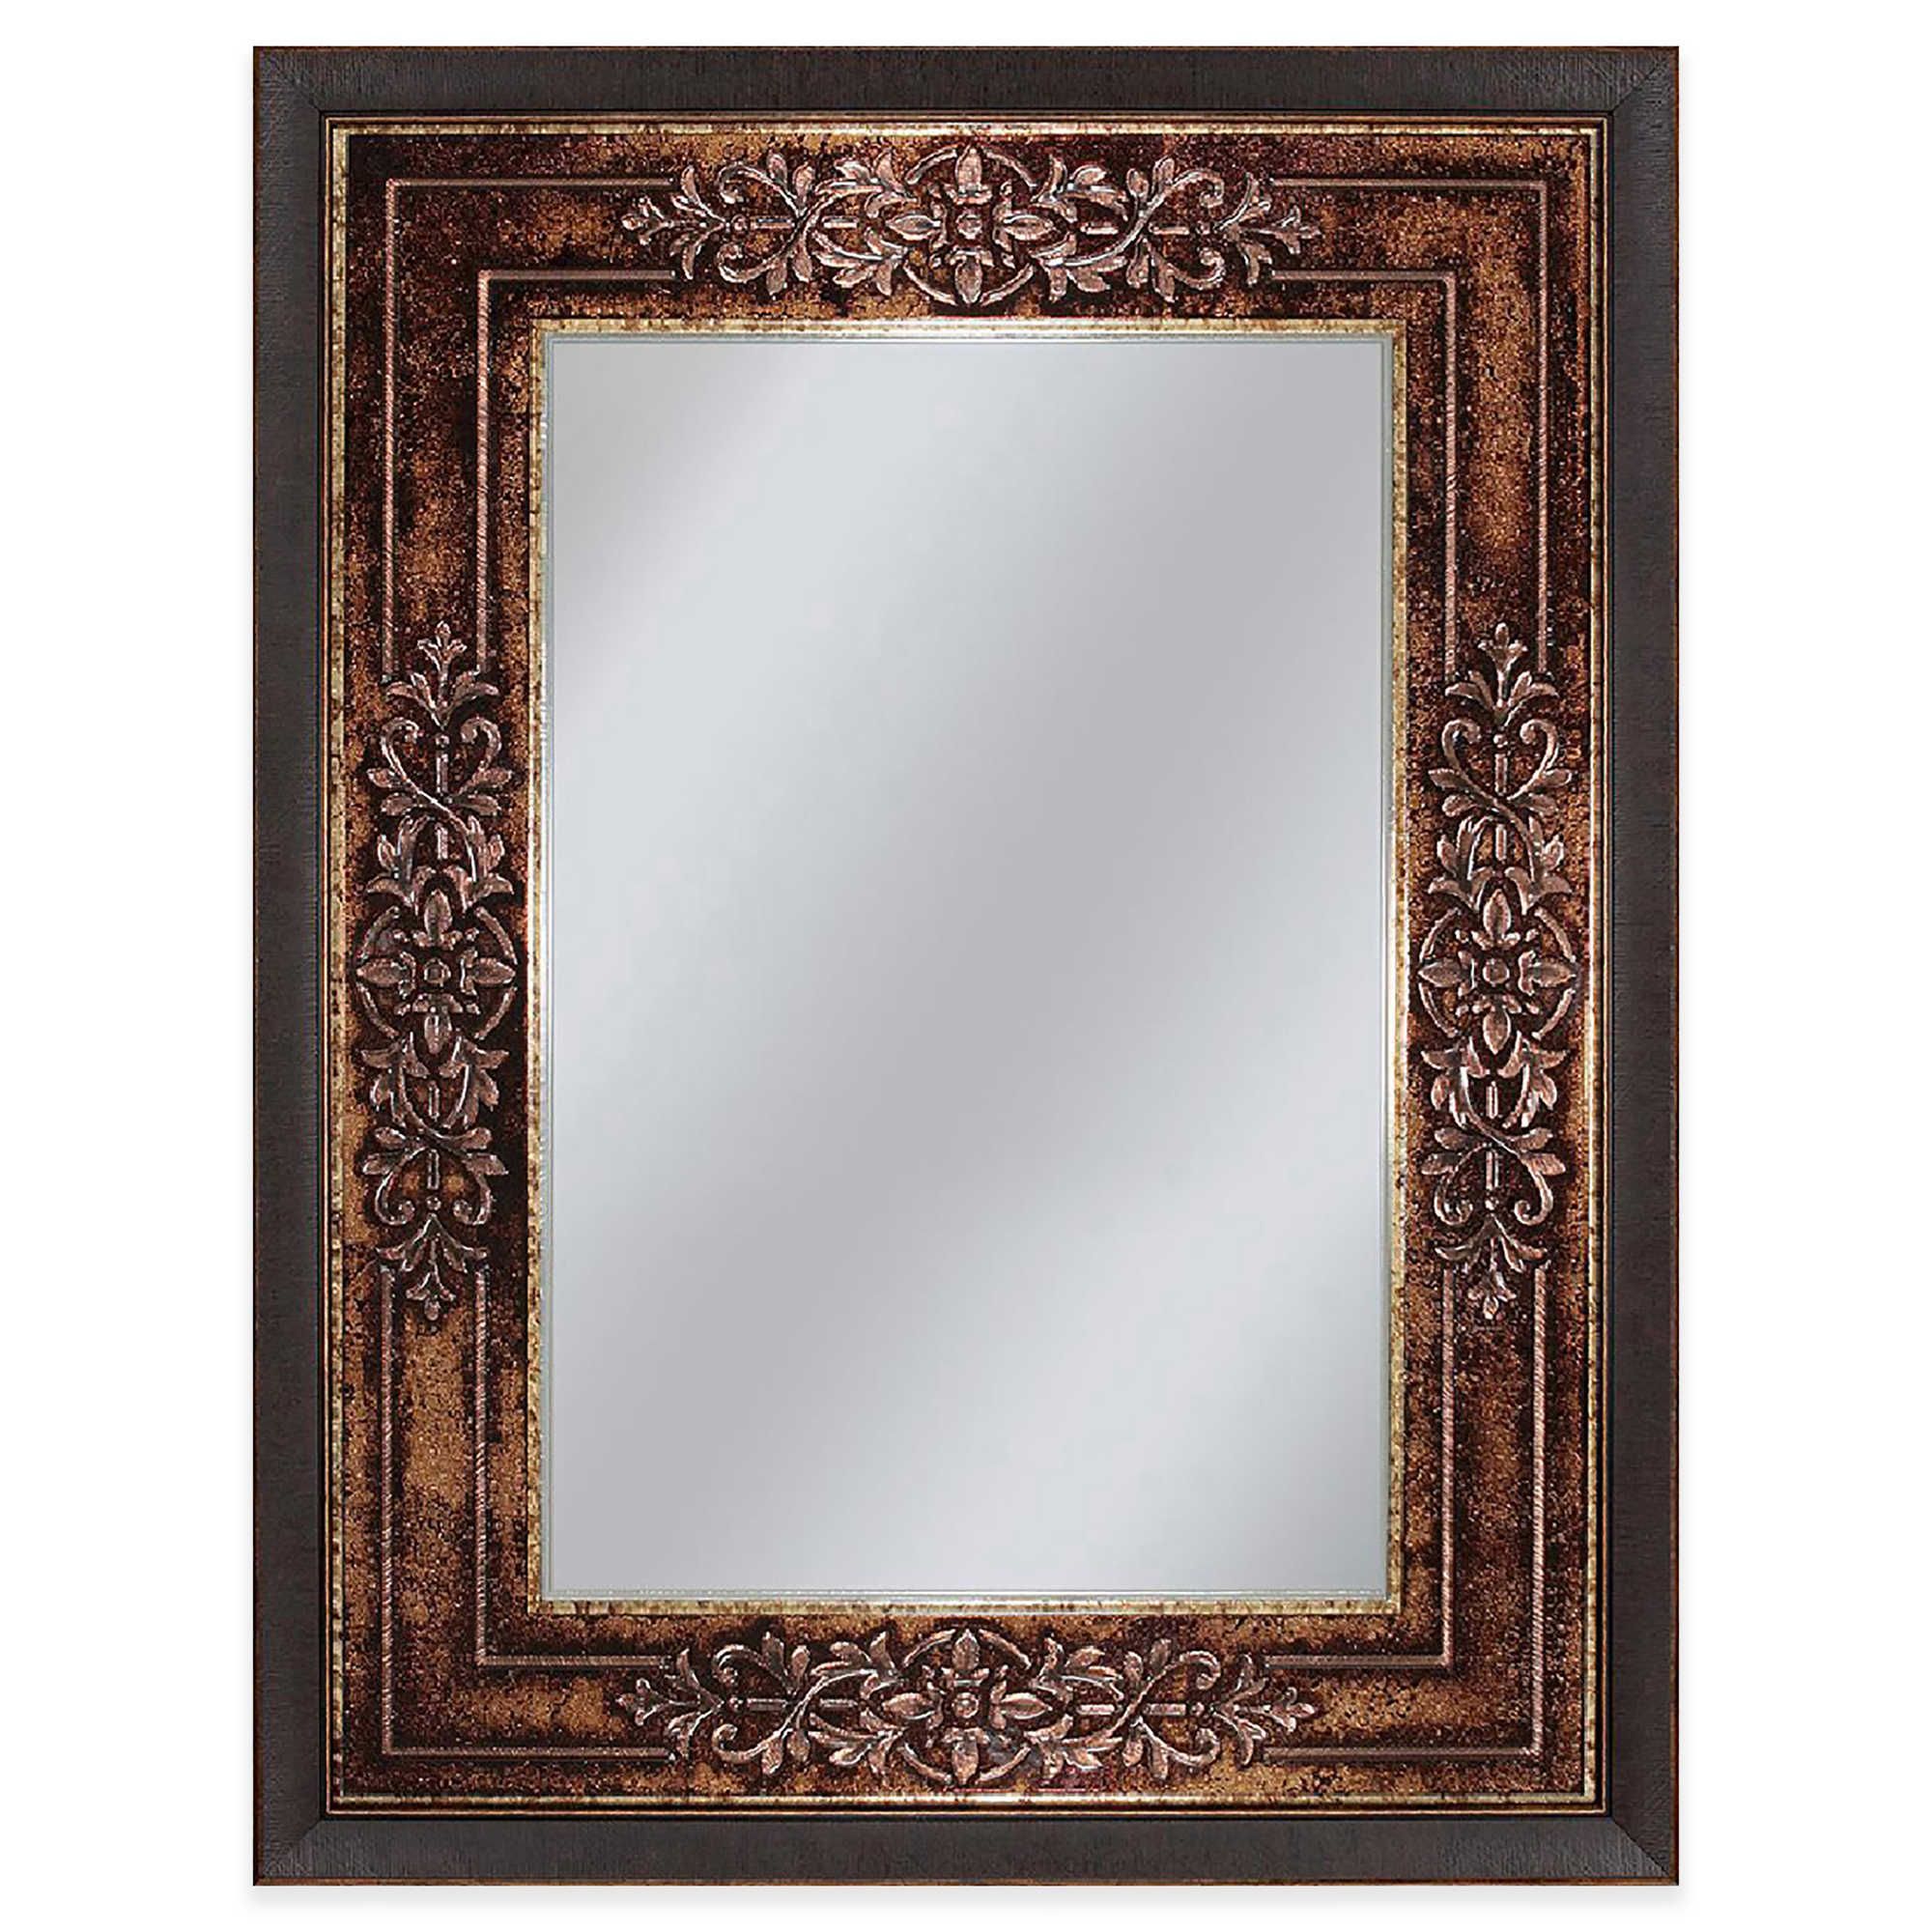 Genoa 27 Inch X 33 Inch Mirror In Bronze | Mirror Wall, Framed Mirror Pertaining To Silver And Bronze Wall Mirrors (View 5 of 15)